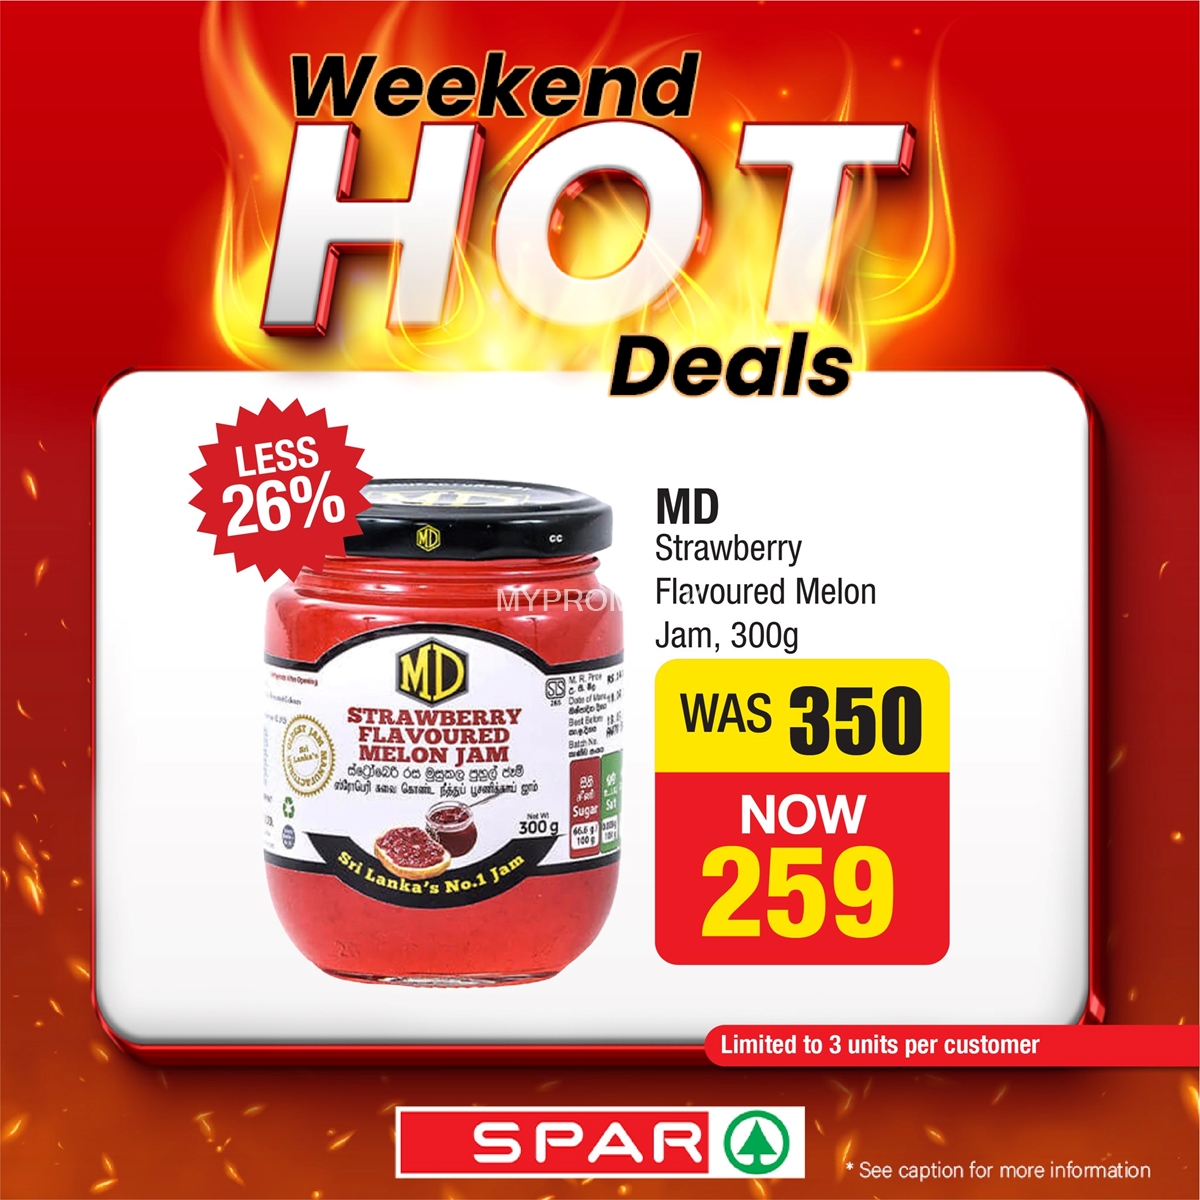 WEEKEND HOT DEALS on selected products at SPAR Sri Lanka